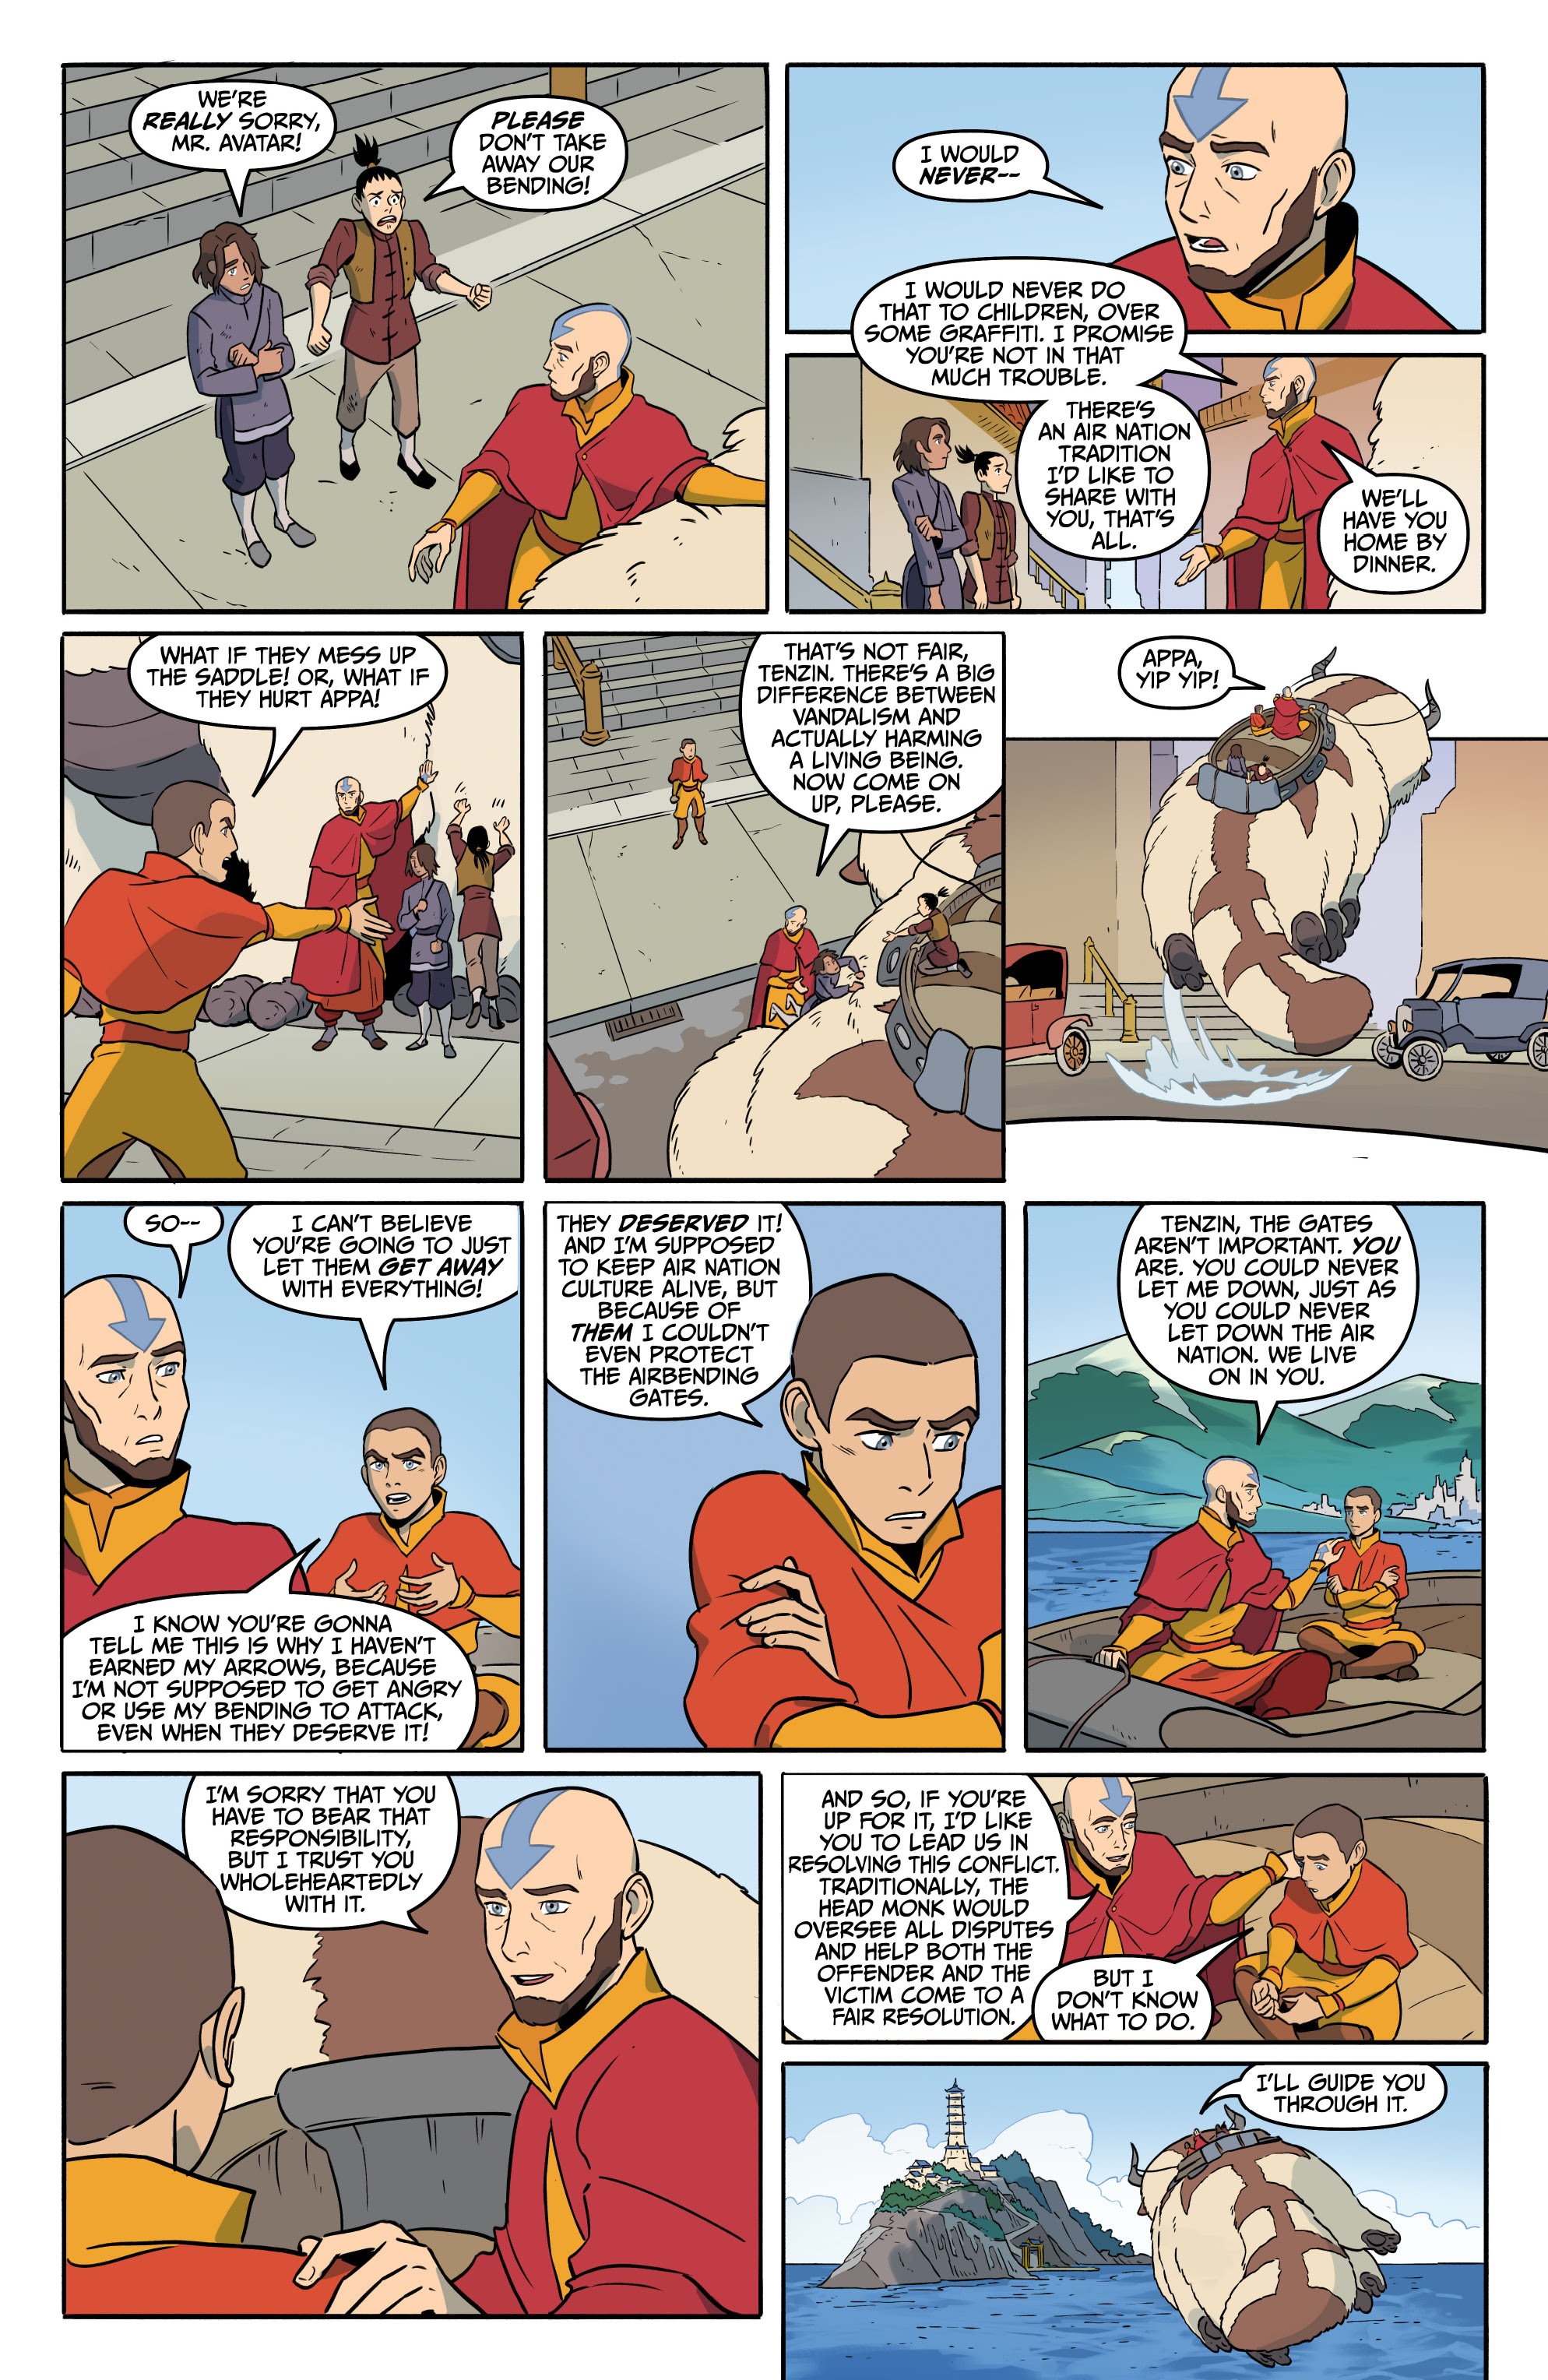 Read online Free Comic Book Day 2021 comic -  Issue # Avatar - The Last Airbender - The Legend of Korra - 10